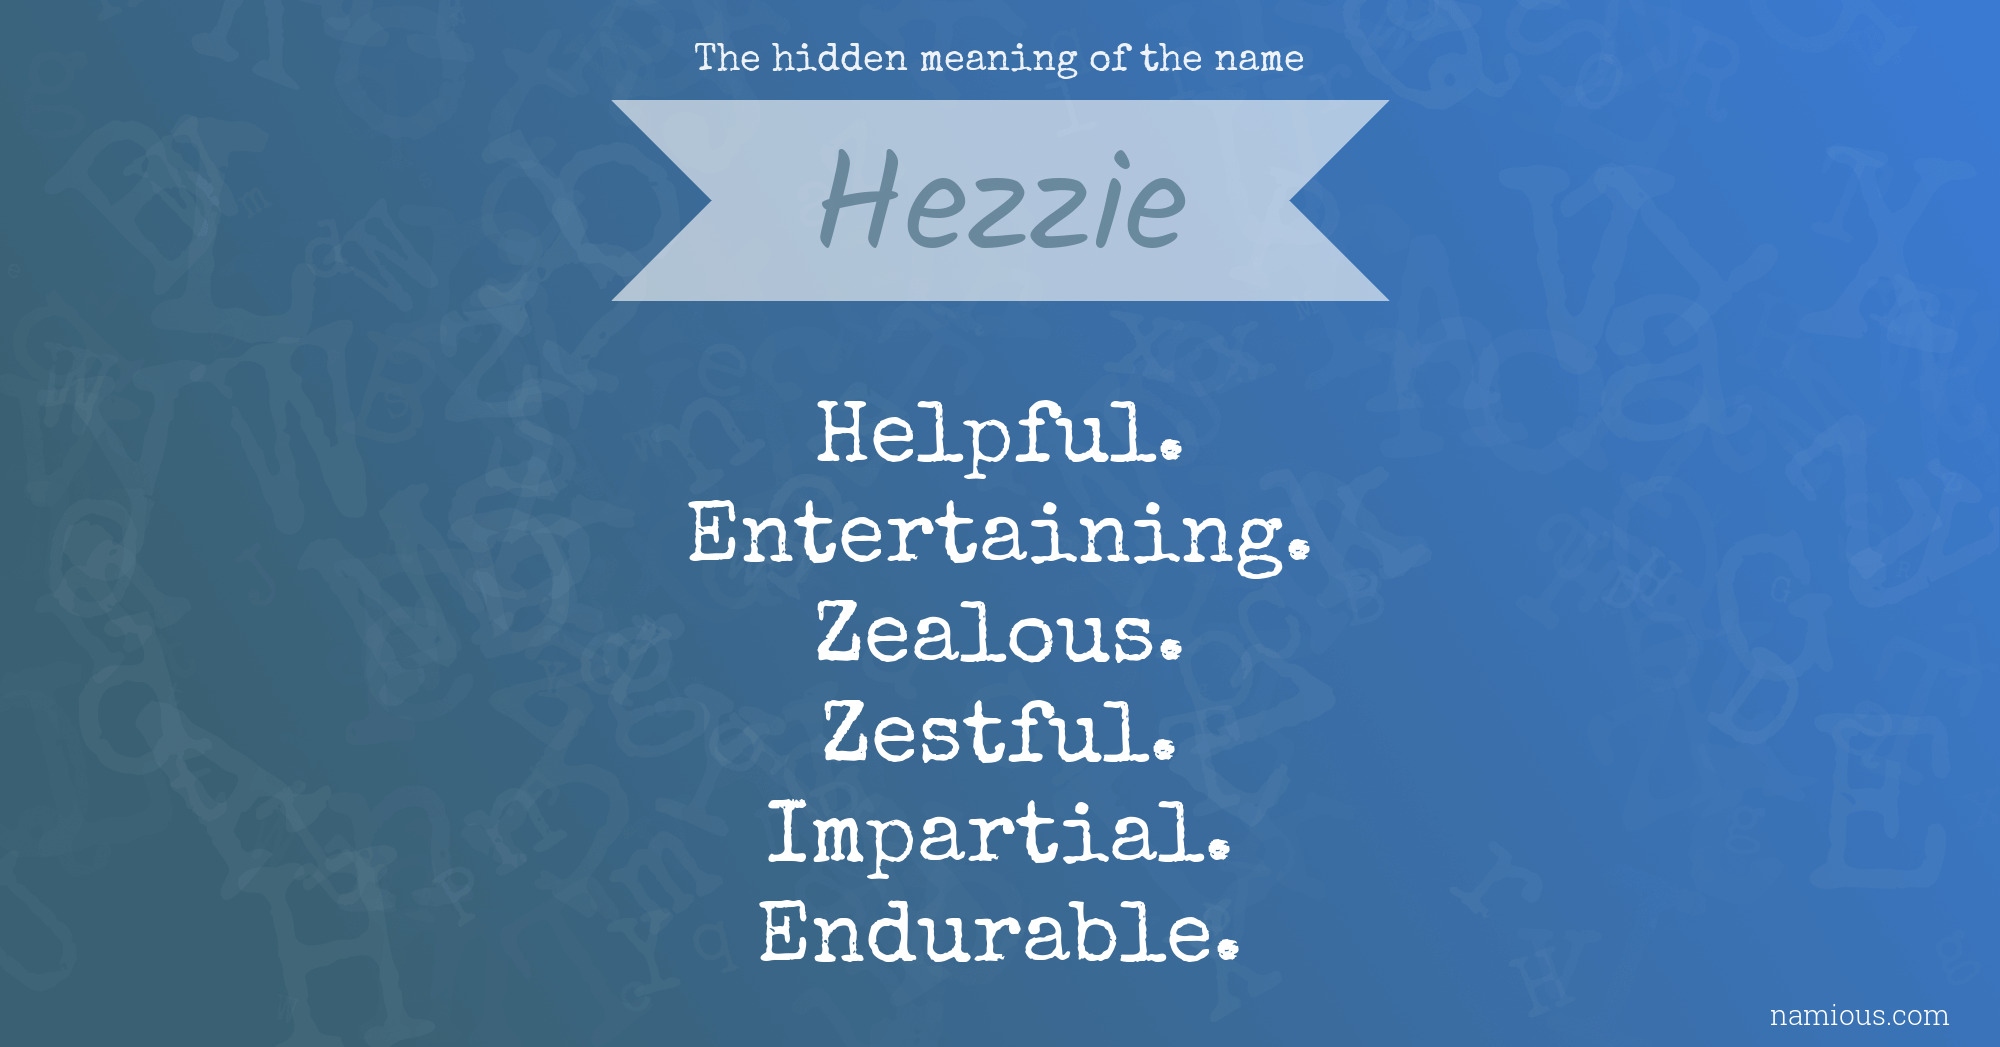 The hidden meaning of the name Hezzie